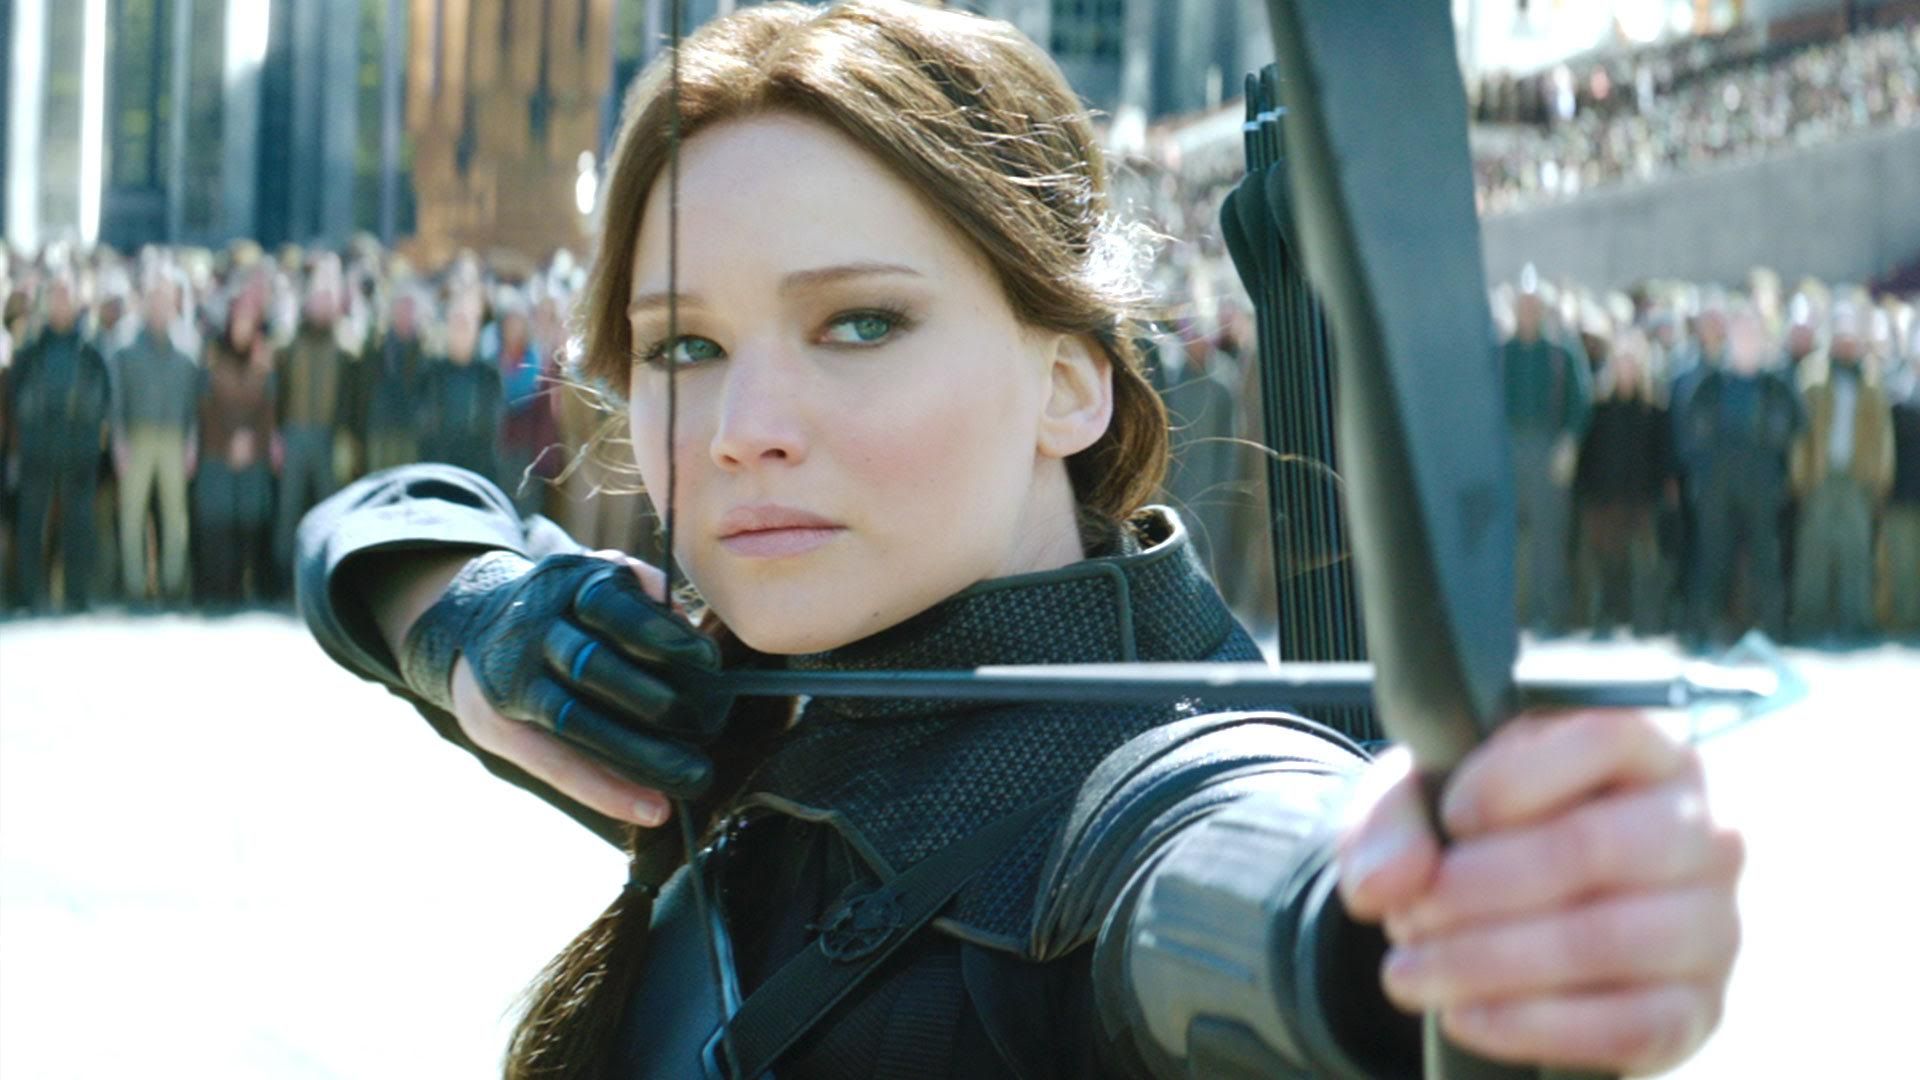 25 Weird Things Cut From The Hunger Games Movies (That Were In The Books)